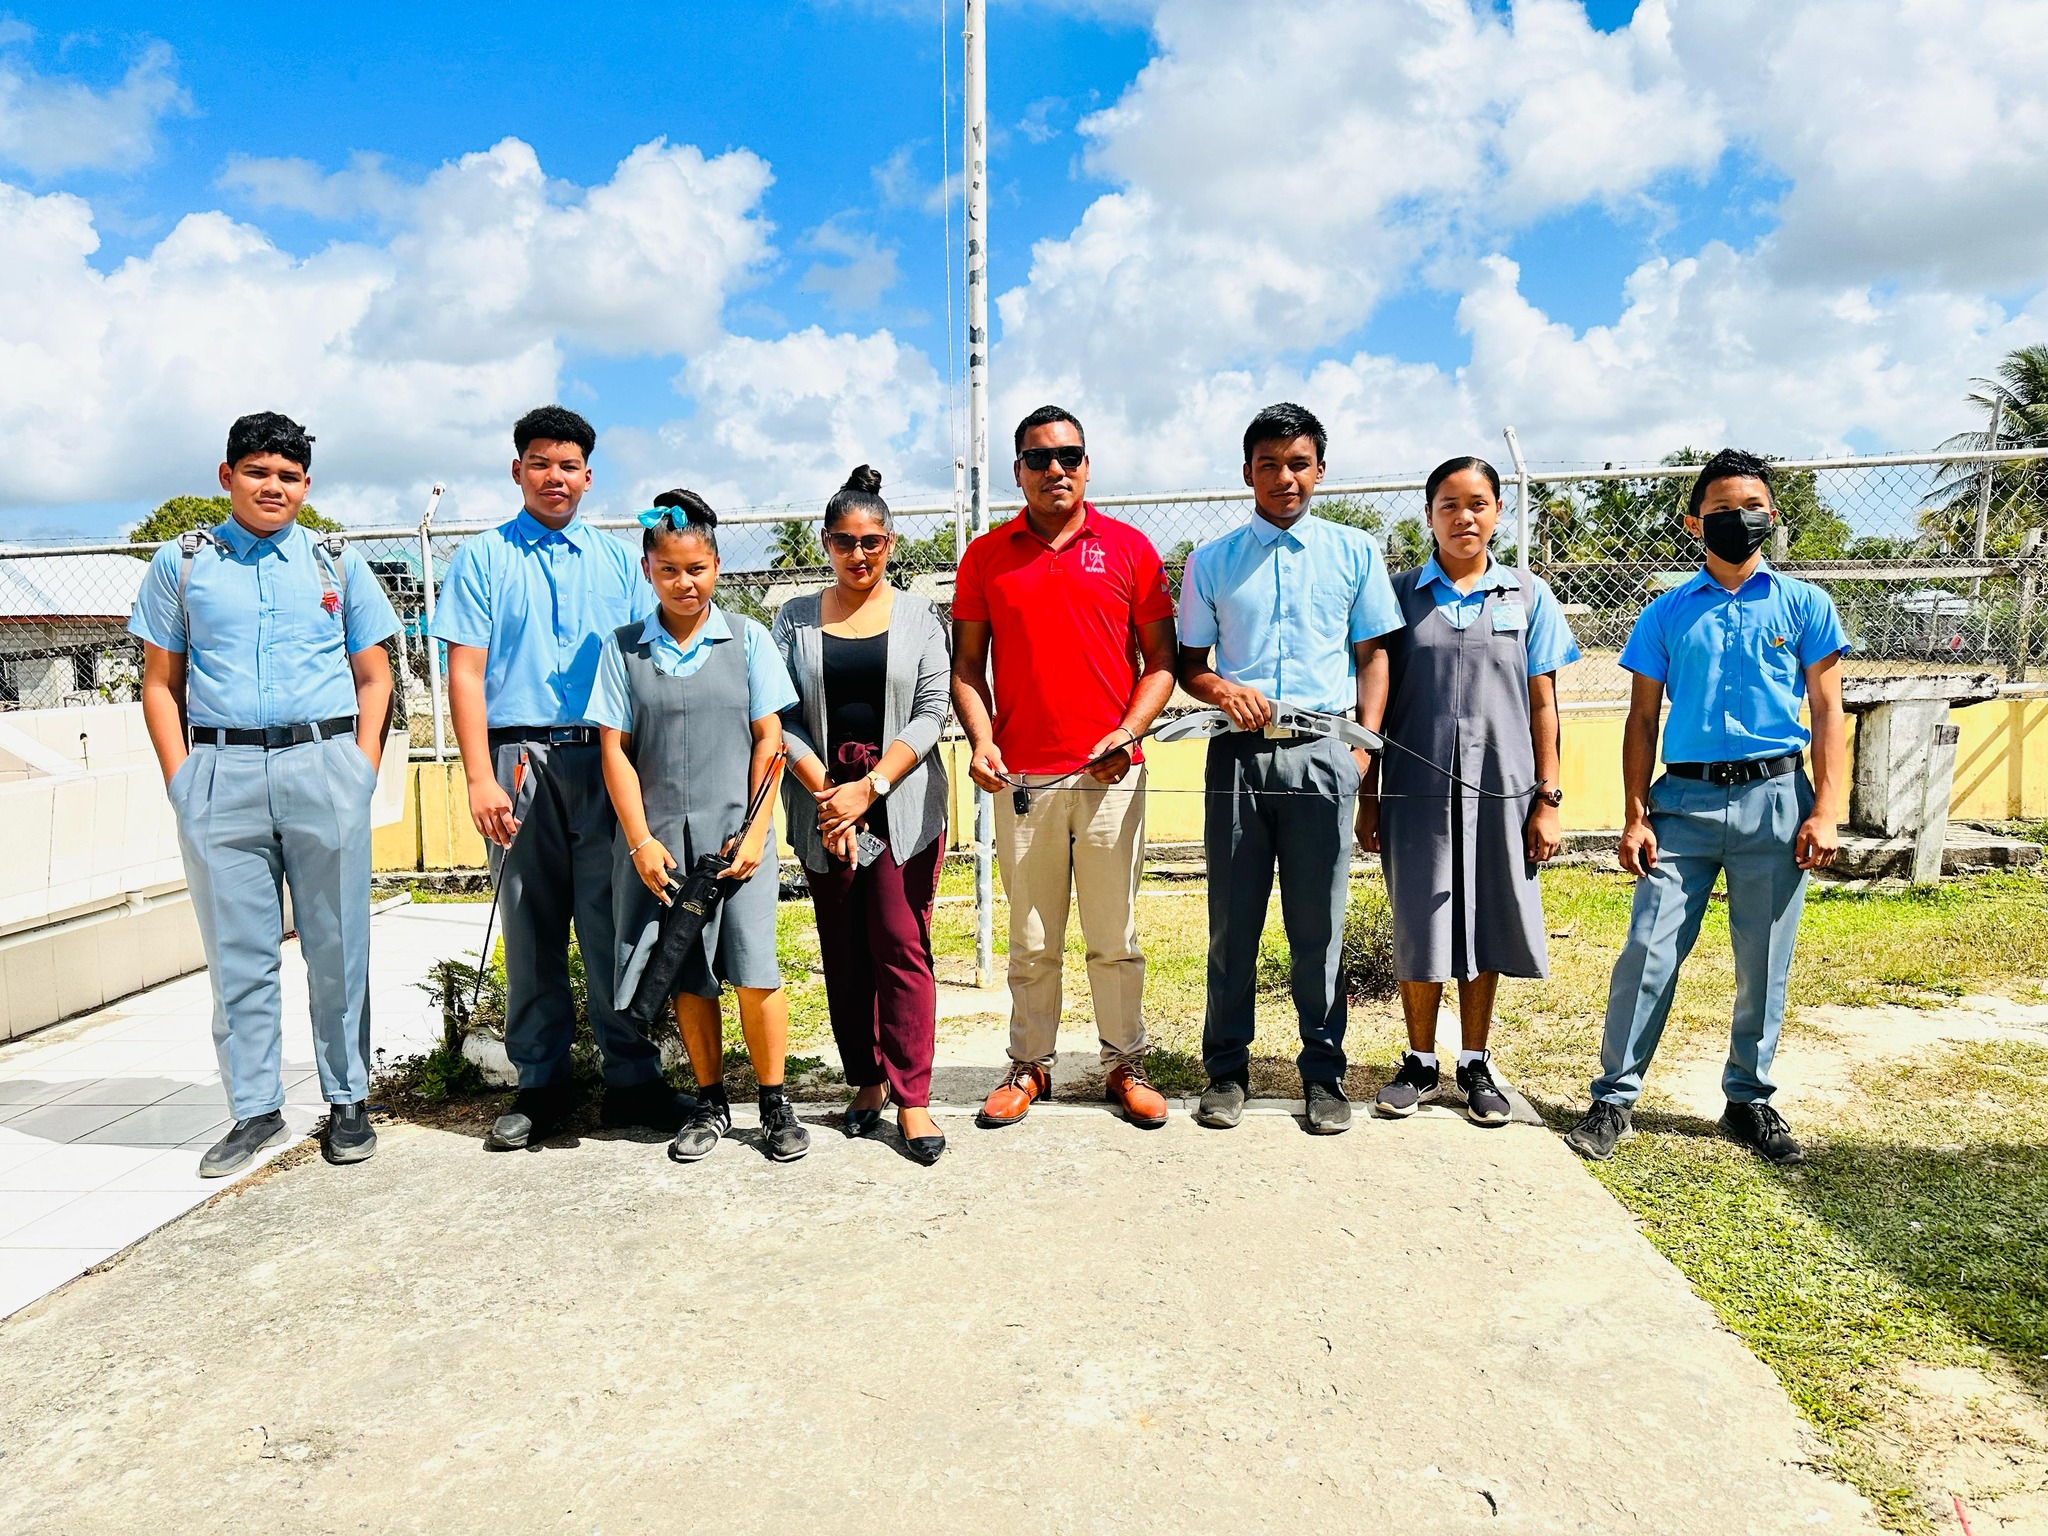 'Santa Rosa Sharp Shooters' join Archery Guyana Under Expert Guidance of Certified National Coach Carlos Henry